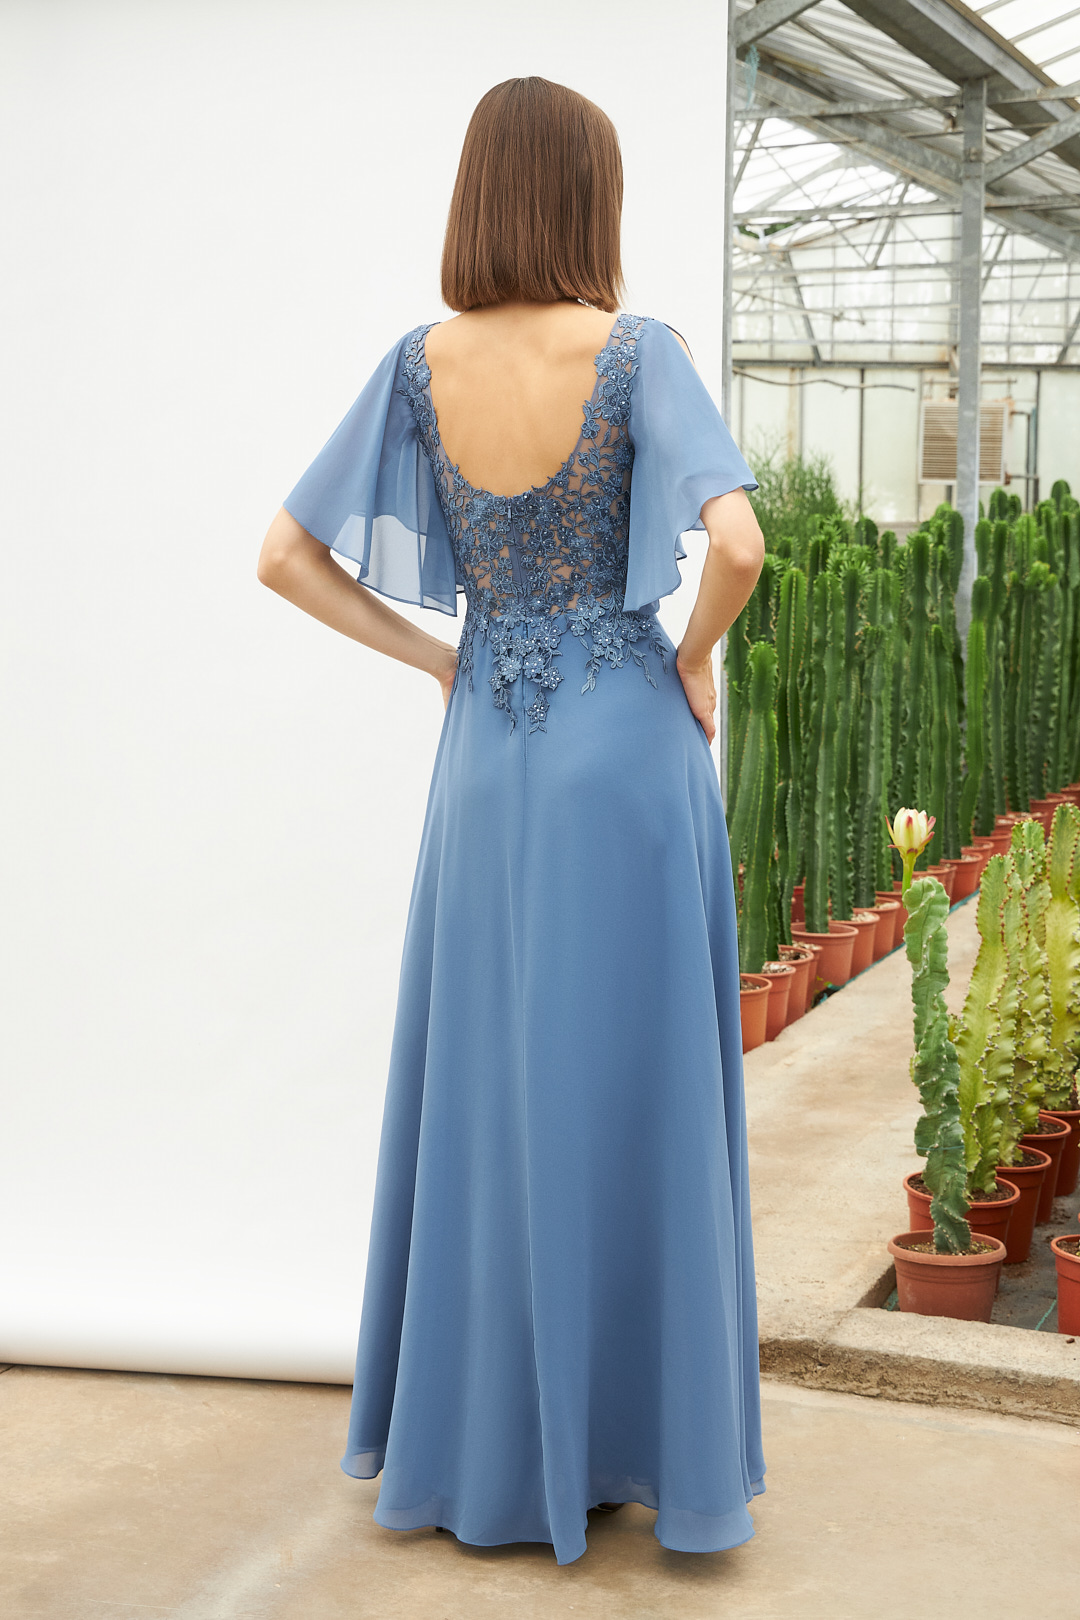 Классические платья / Long classic chiffon dress with lace and beaded top and short sleeves